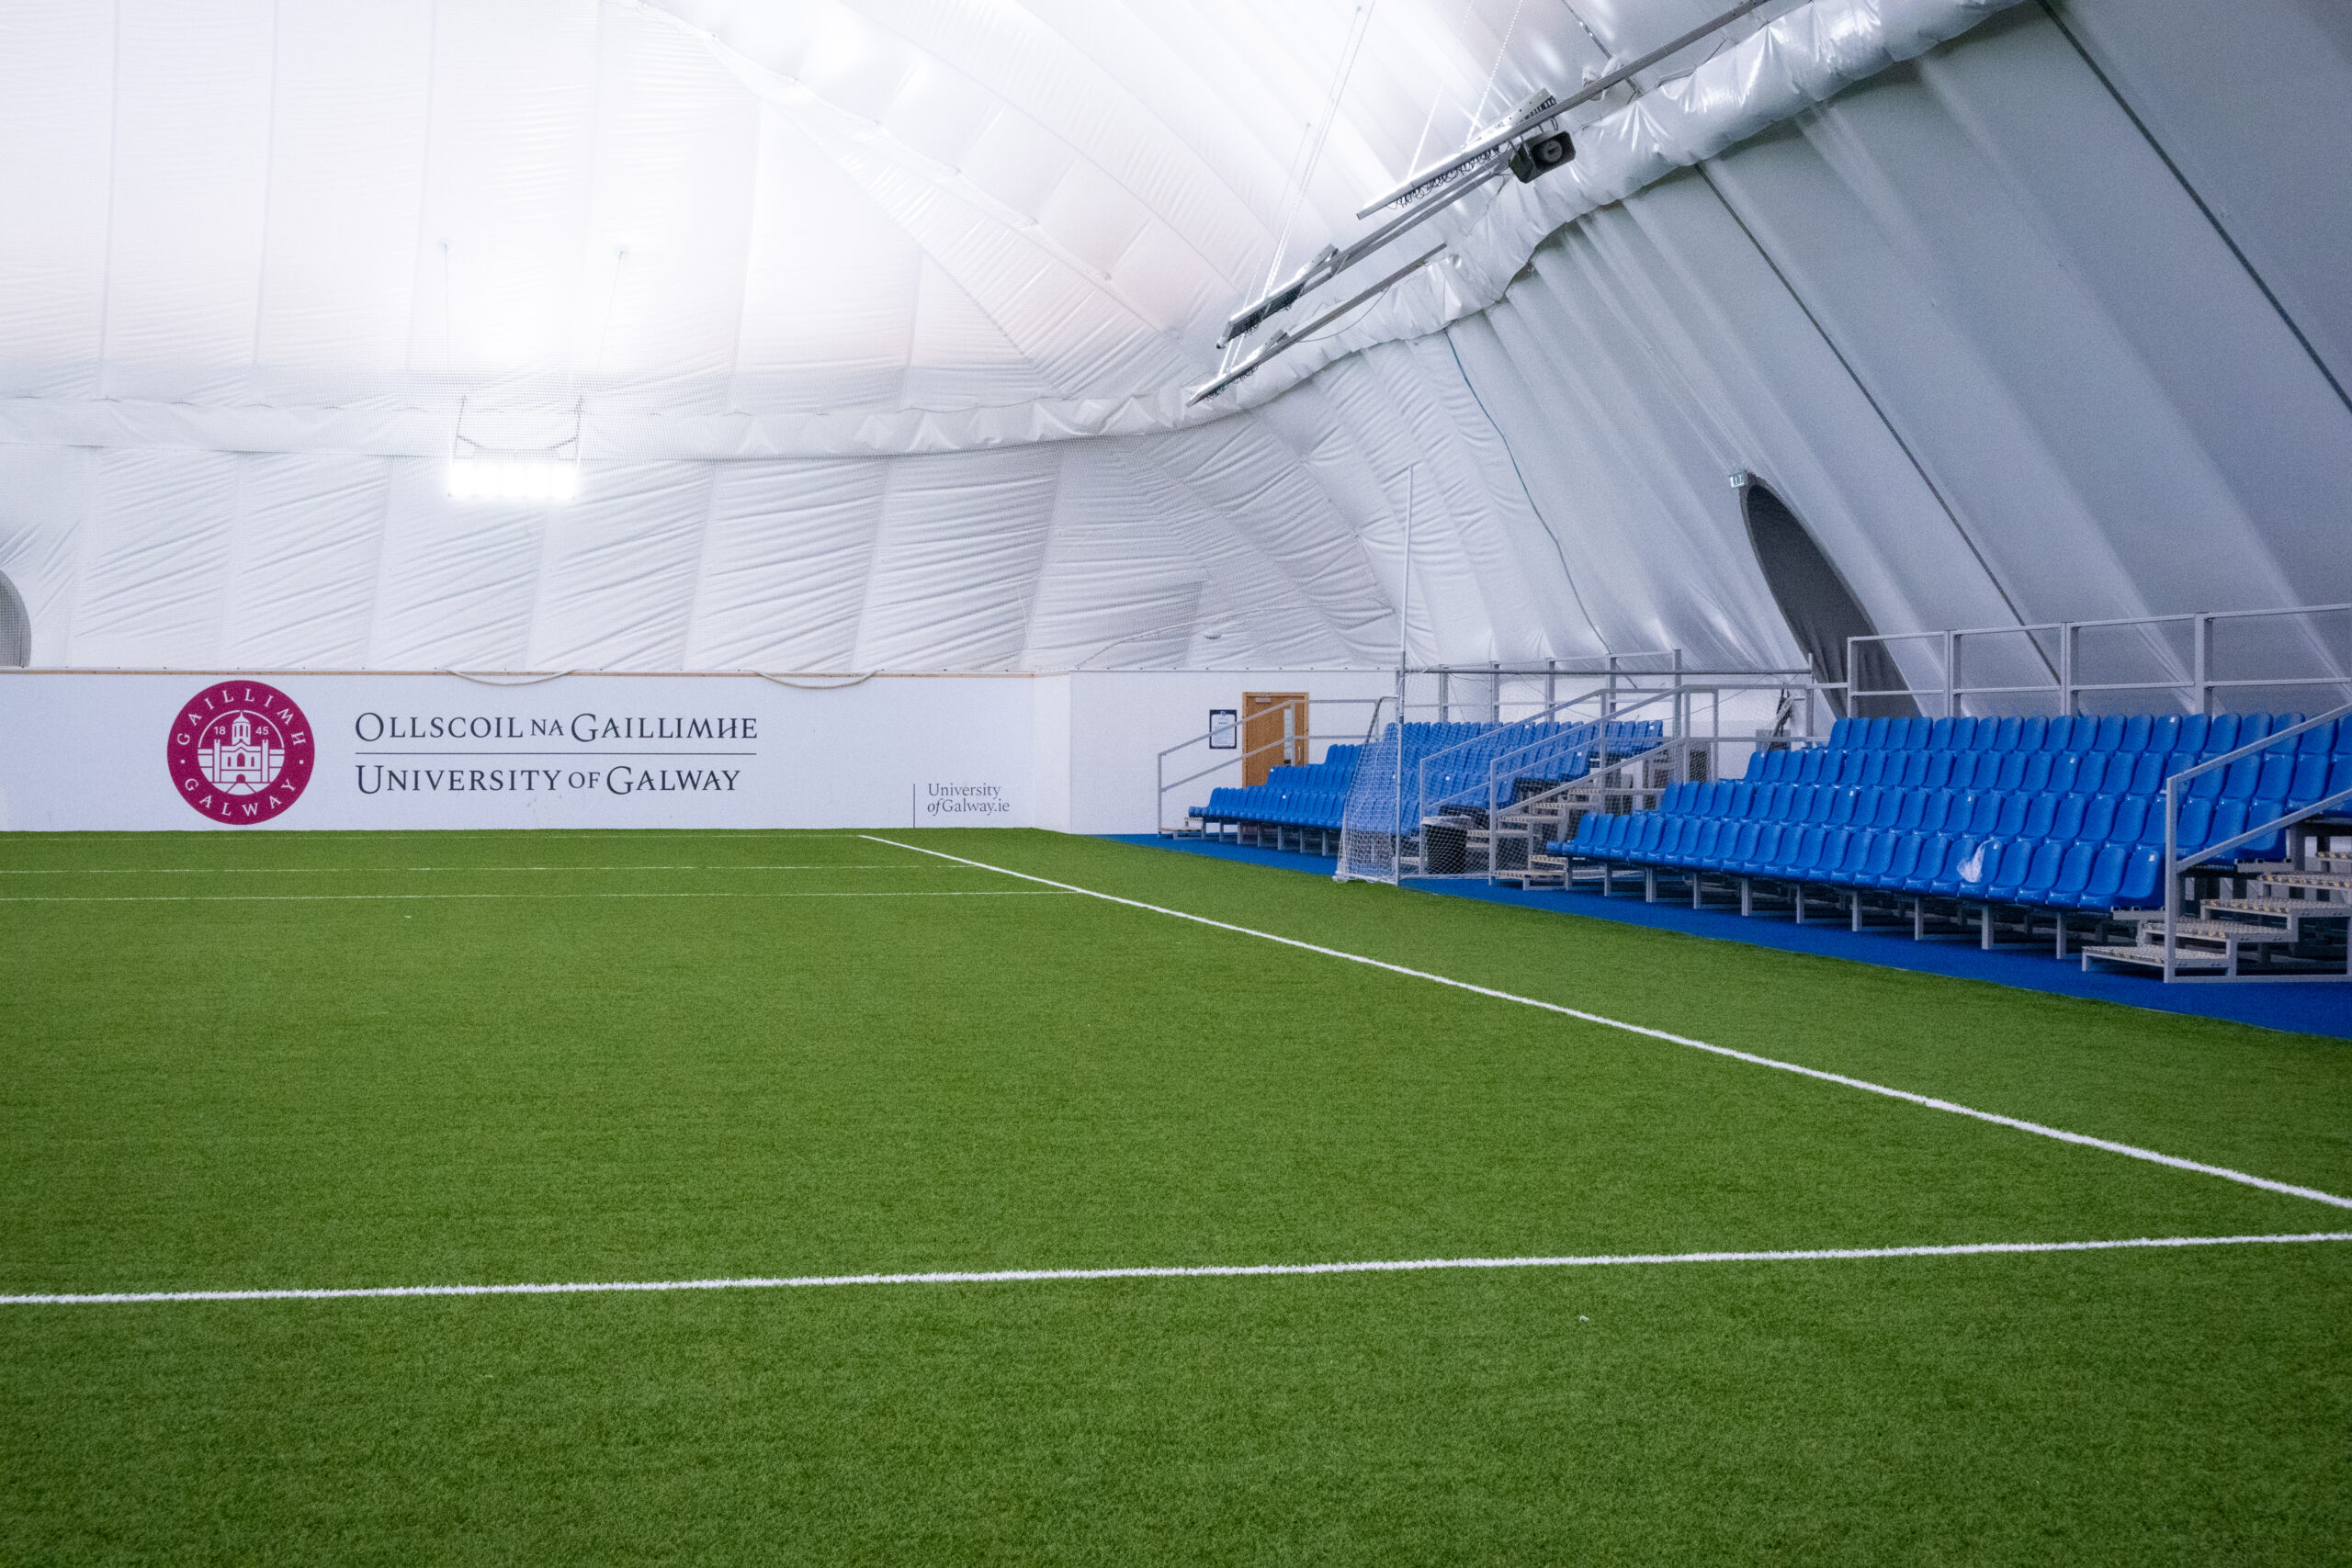 Smart Sustainability at the World’s Largest Sports Air Dome